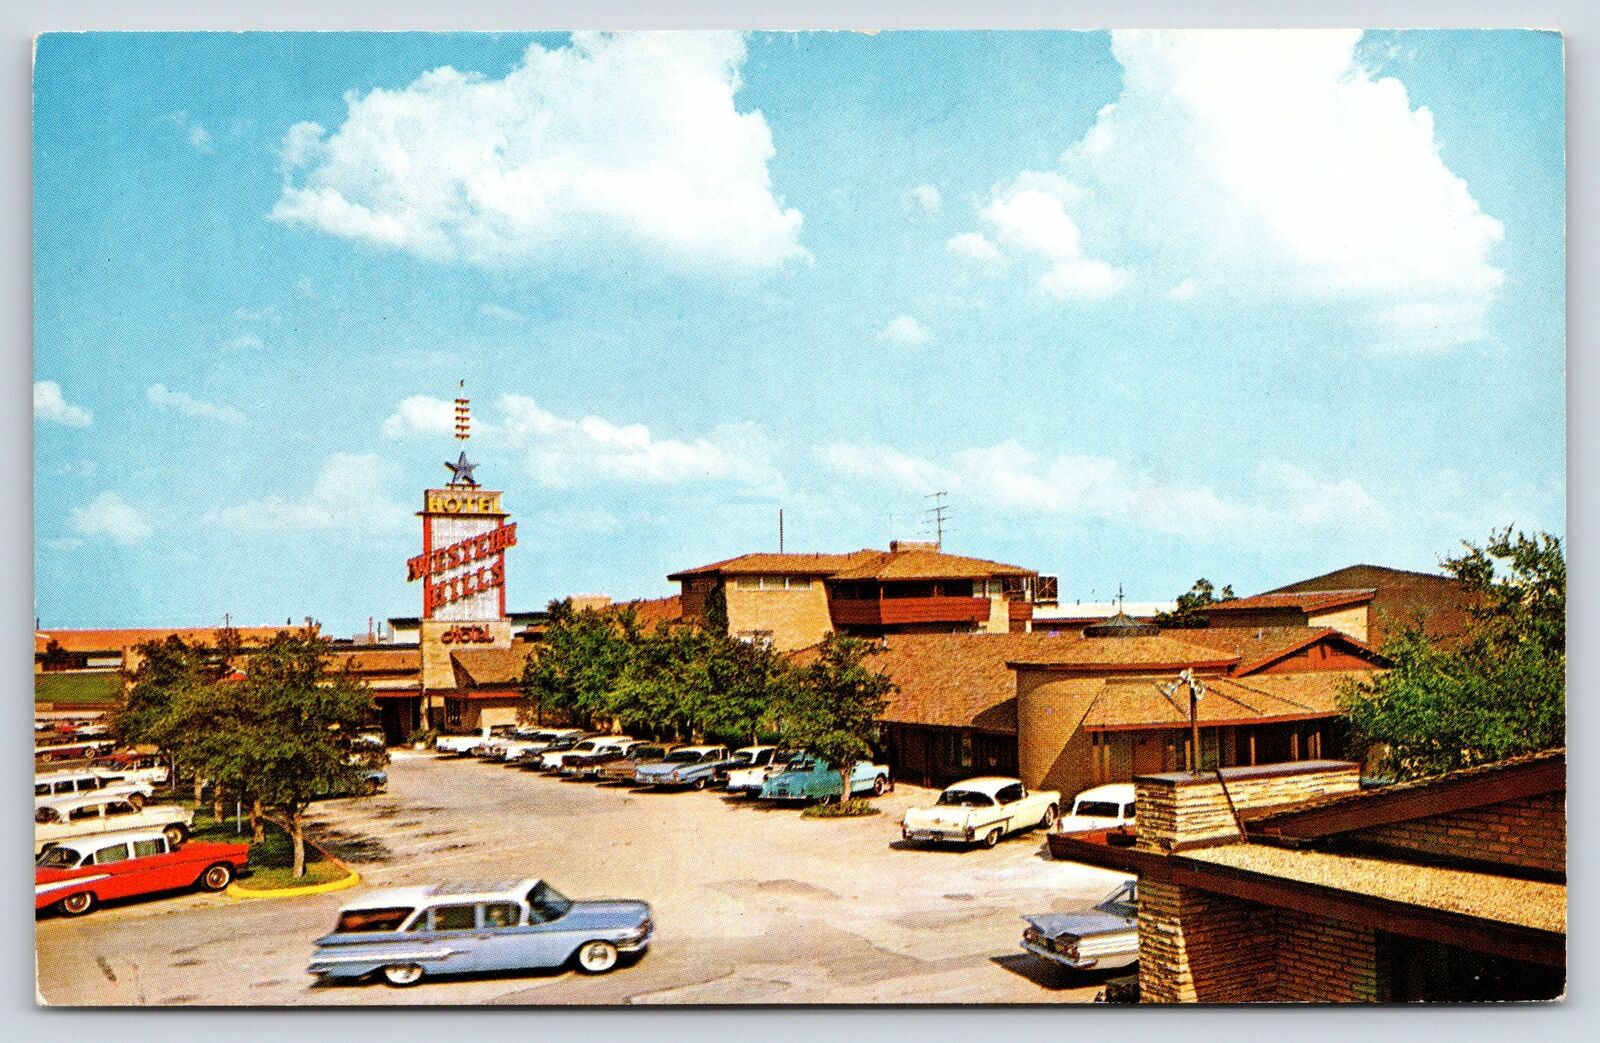 Fort Worth Texas~Western Hills Hotel~Neon Googie Sign~Station Wagon~1950s Cars